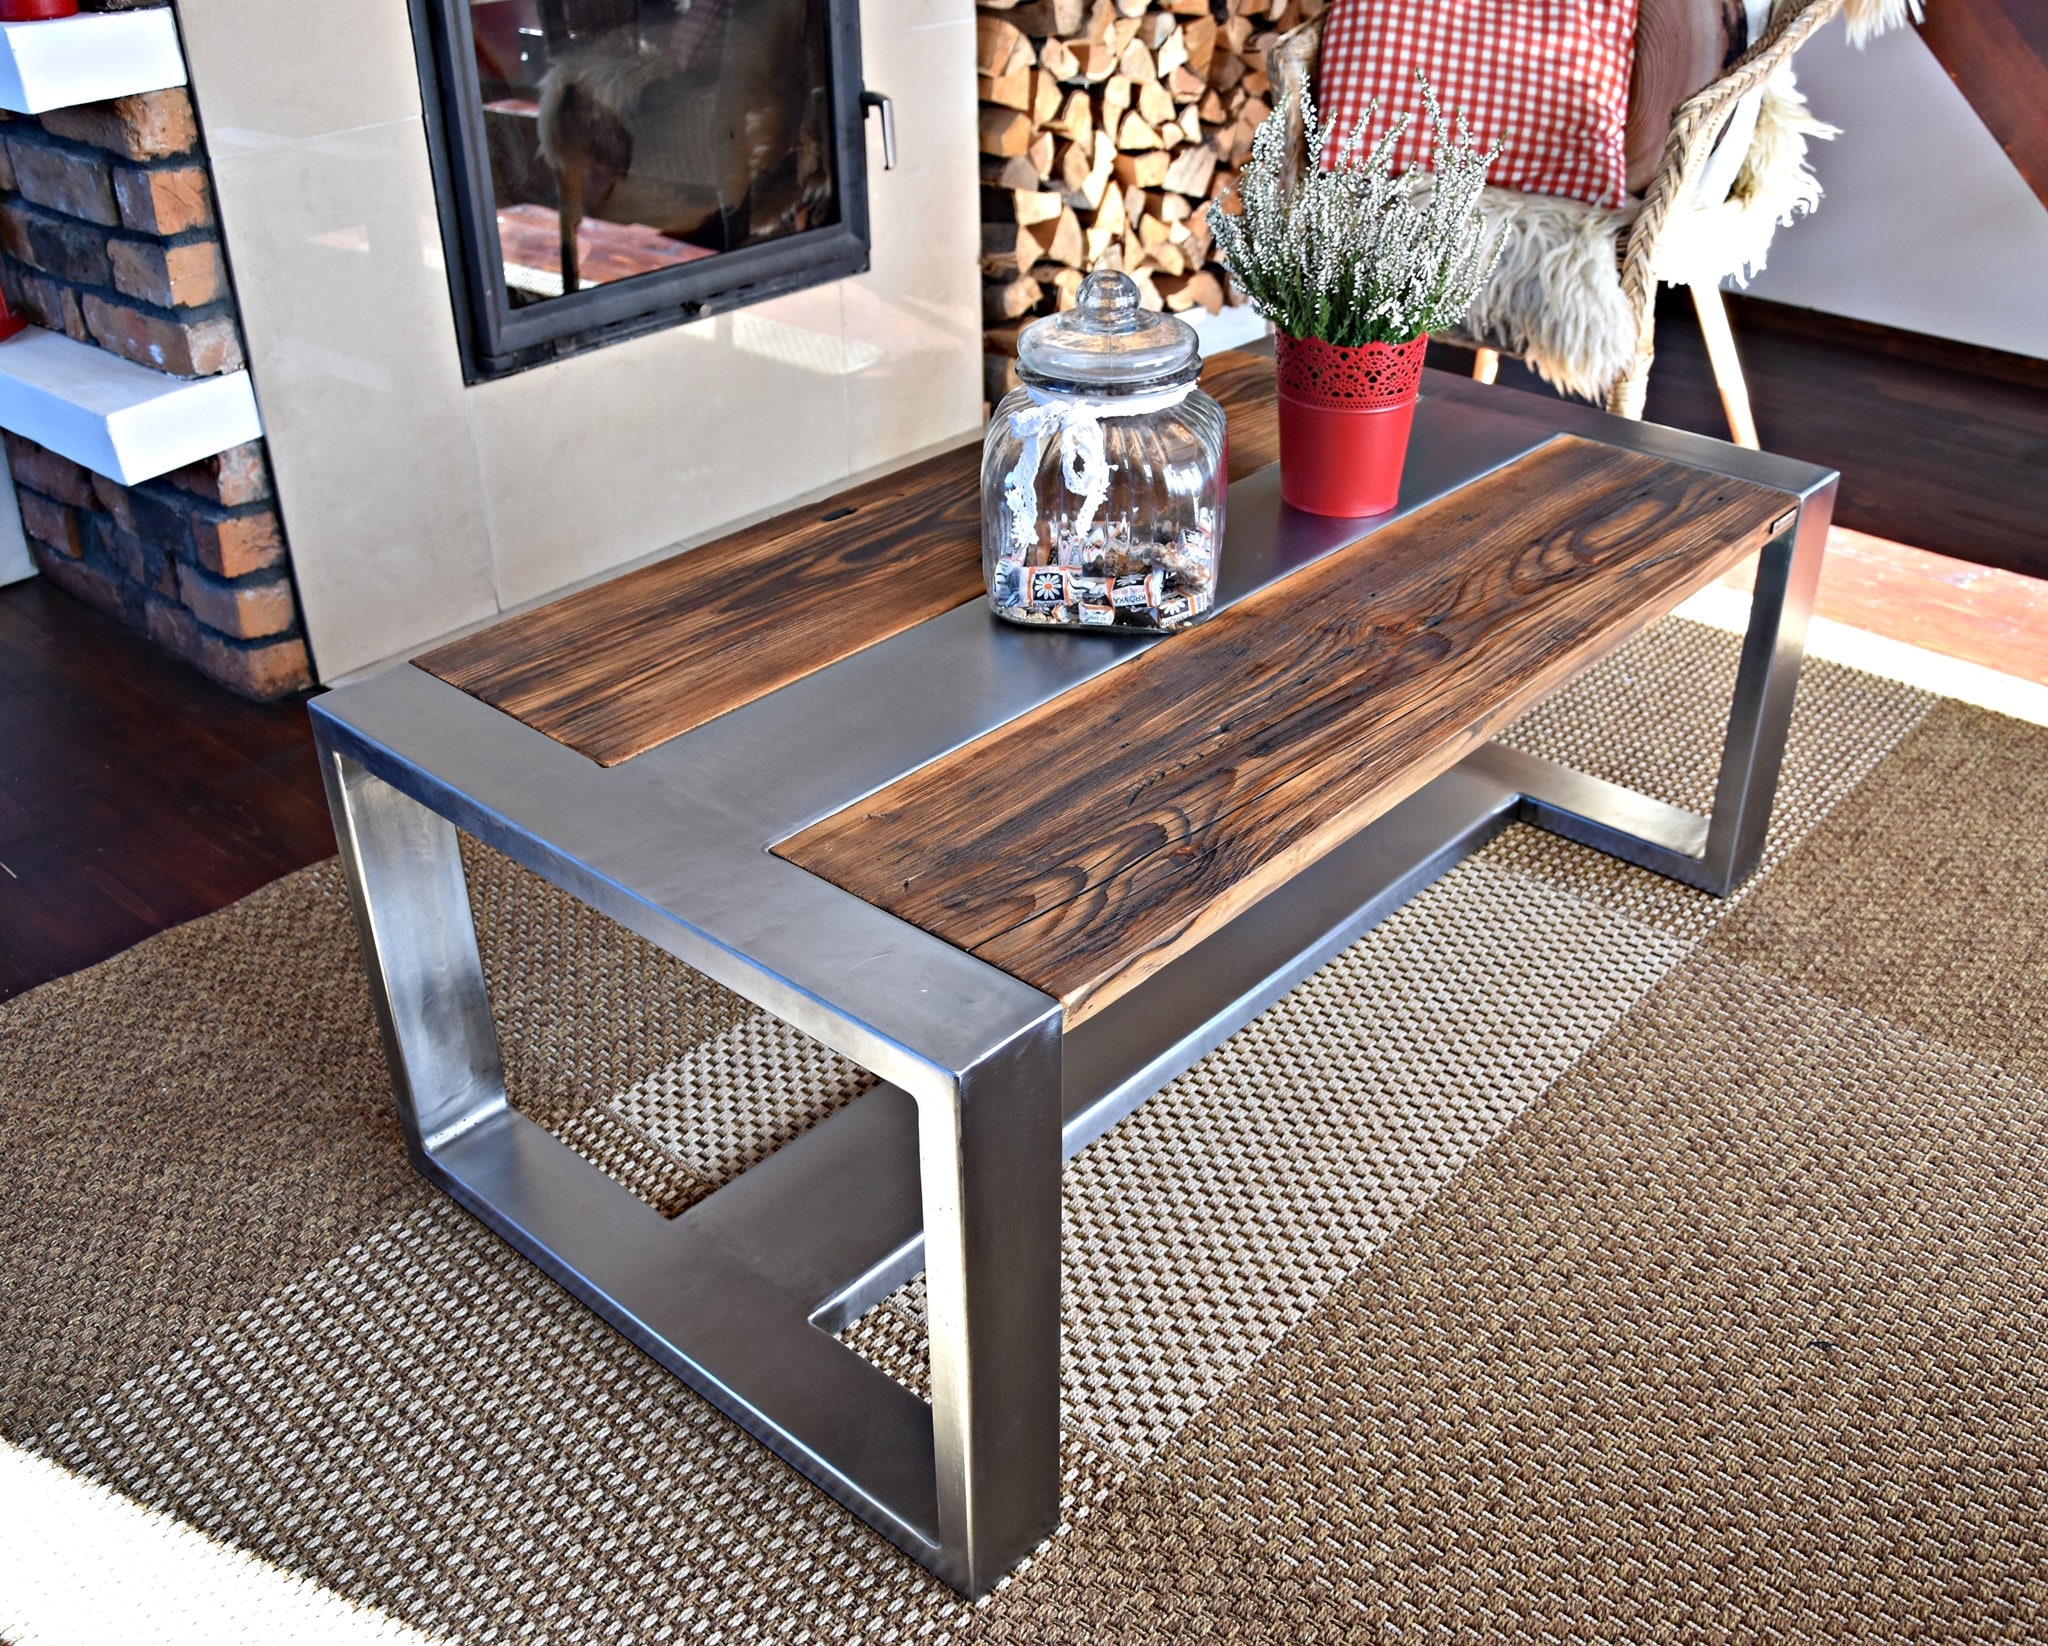 diy kitchen wood table coffee style